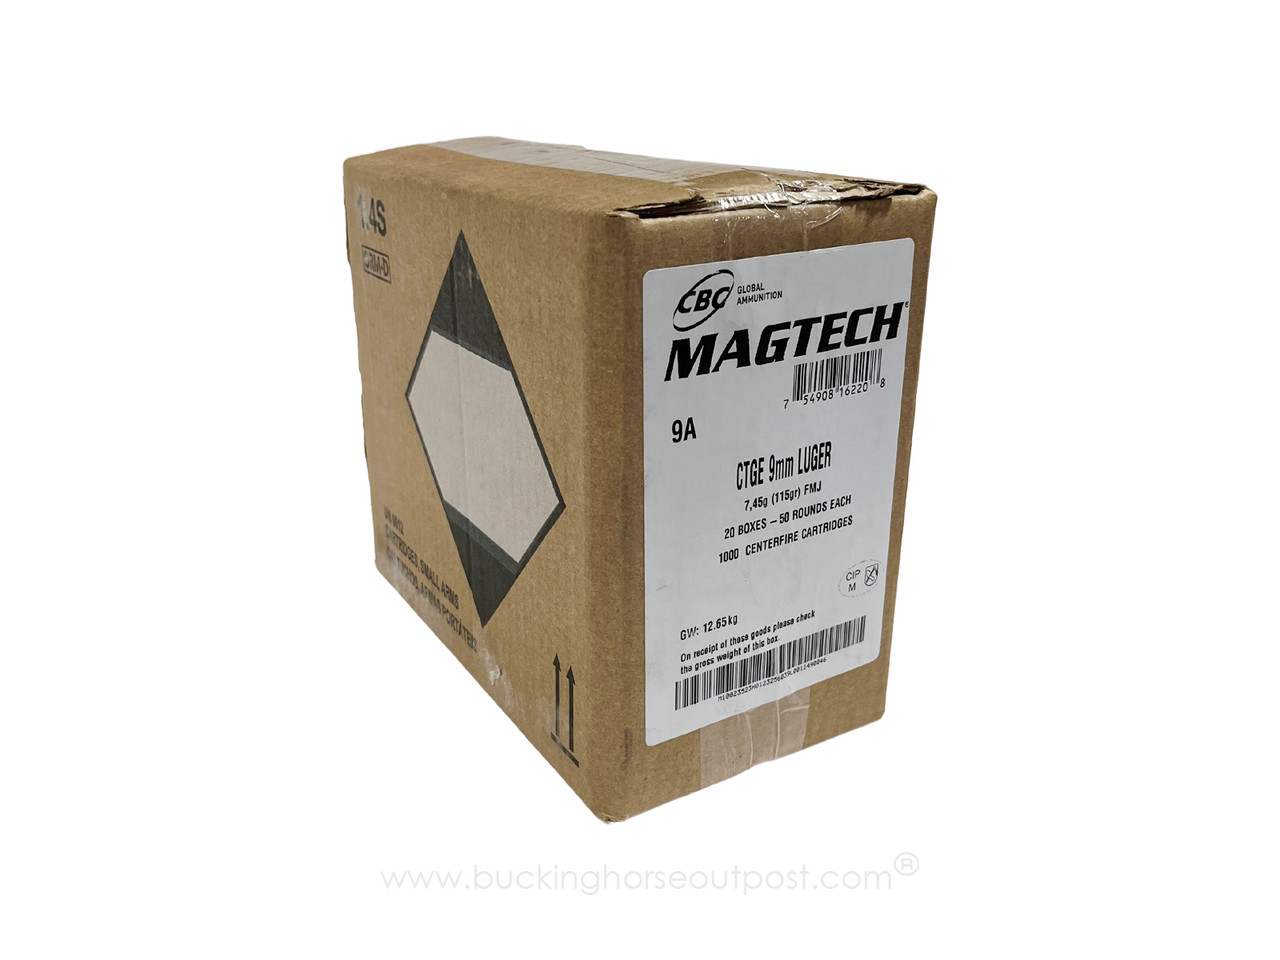 1000 ROUNDS, MAGTECH 9MM 115GR FMJ BRASS CASED AMMUNITION (Twenty boxes of  50 rounds each)